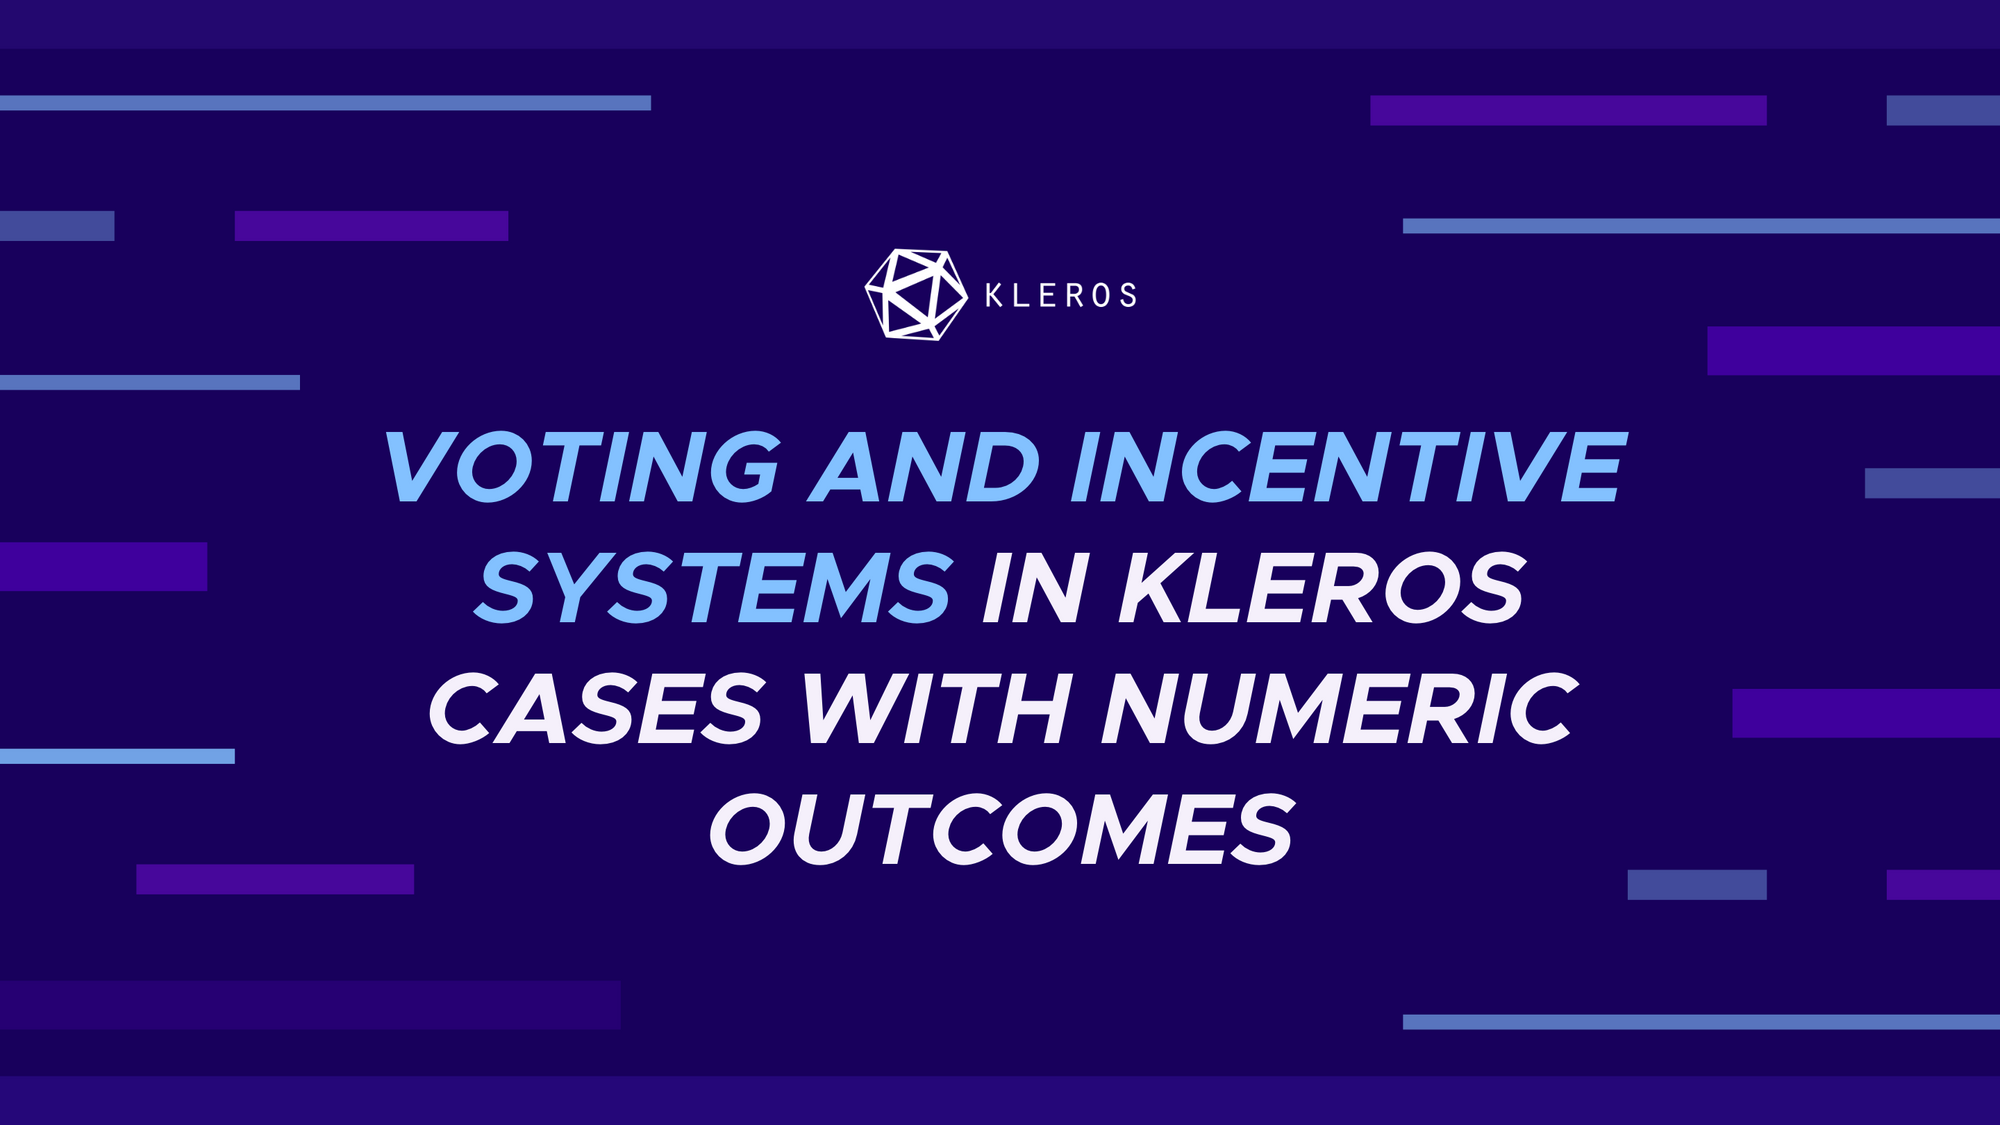 Voting and Incentive Systems in Kleros Cases with Numeric Outcomes